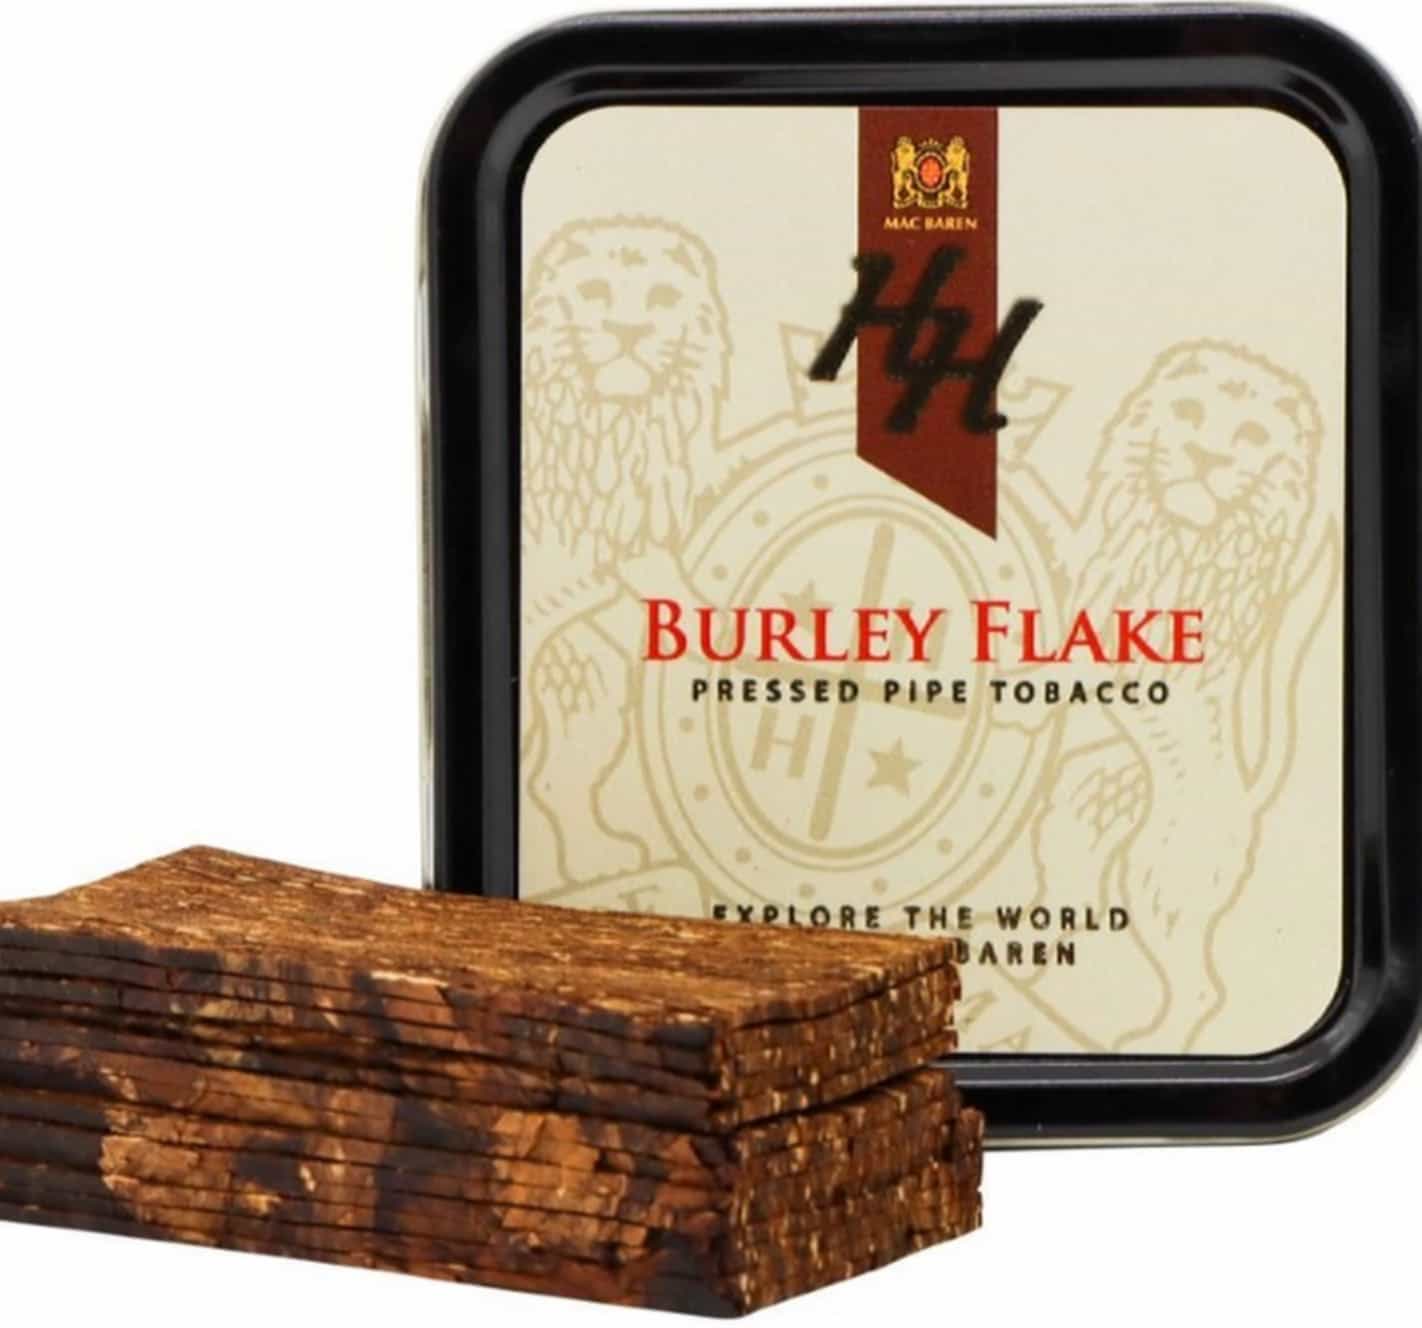 A glimpse of Red Burley tobacco in a harmonious blend